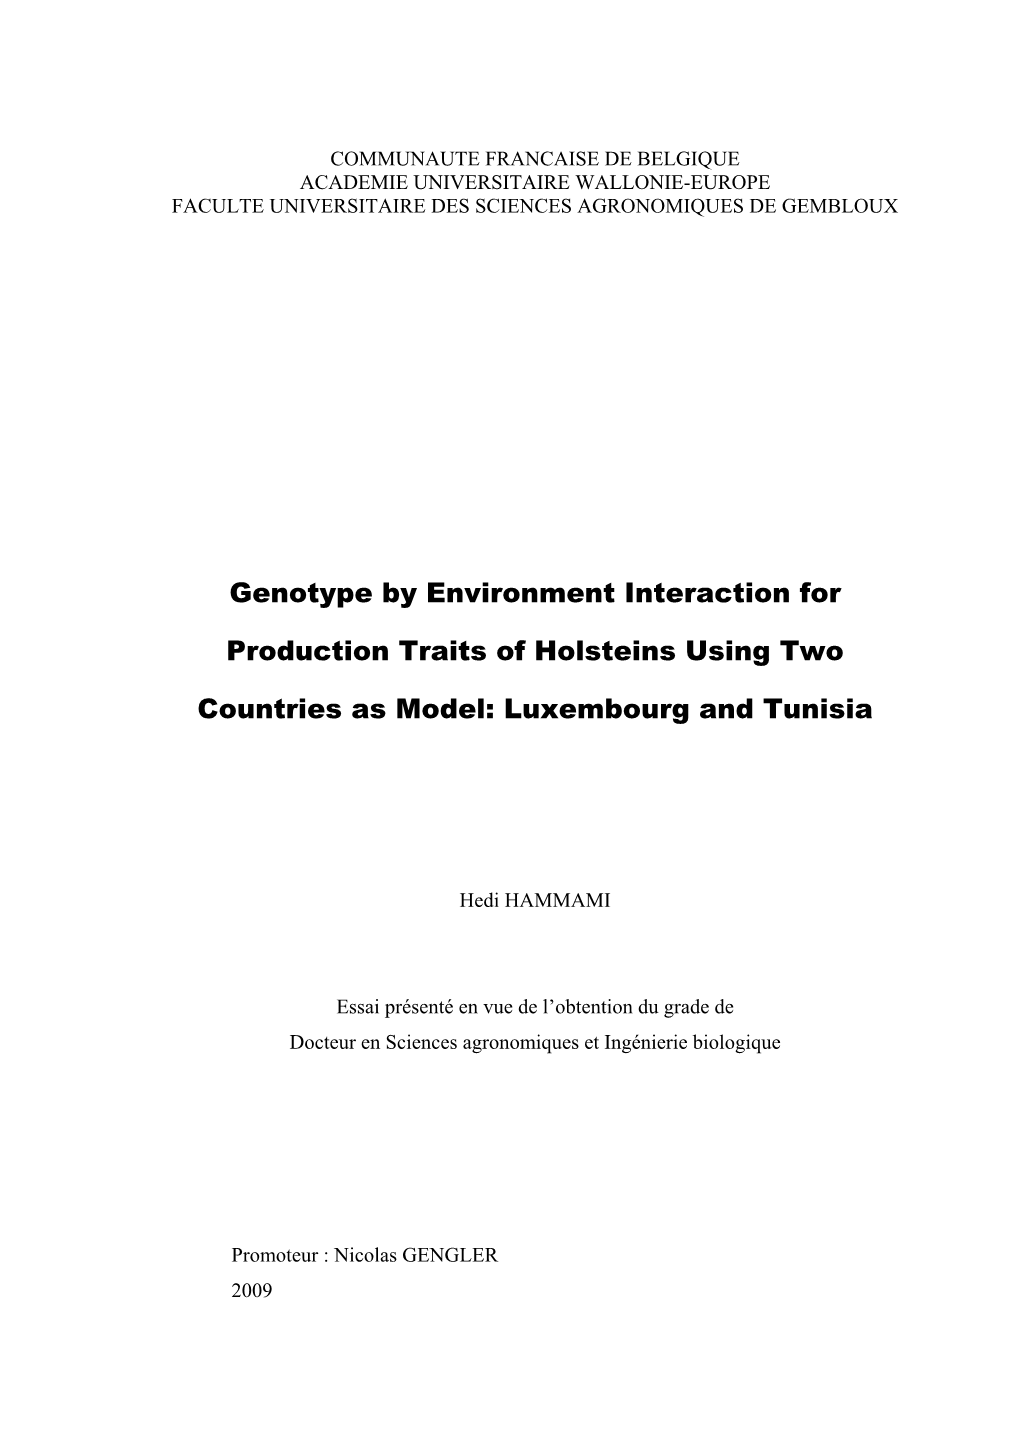 Genotype by Environment Interaction for Production Traits of Holsteins Using Two Countries As Model: Luxembourg and Tunisia (Doctoral Thesis)